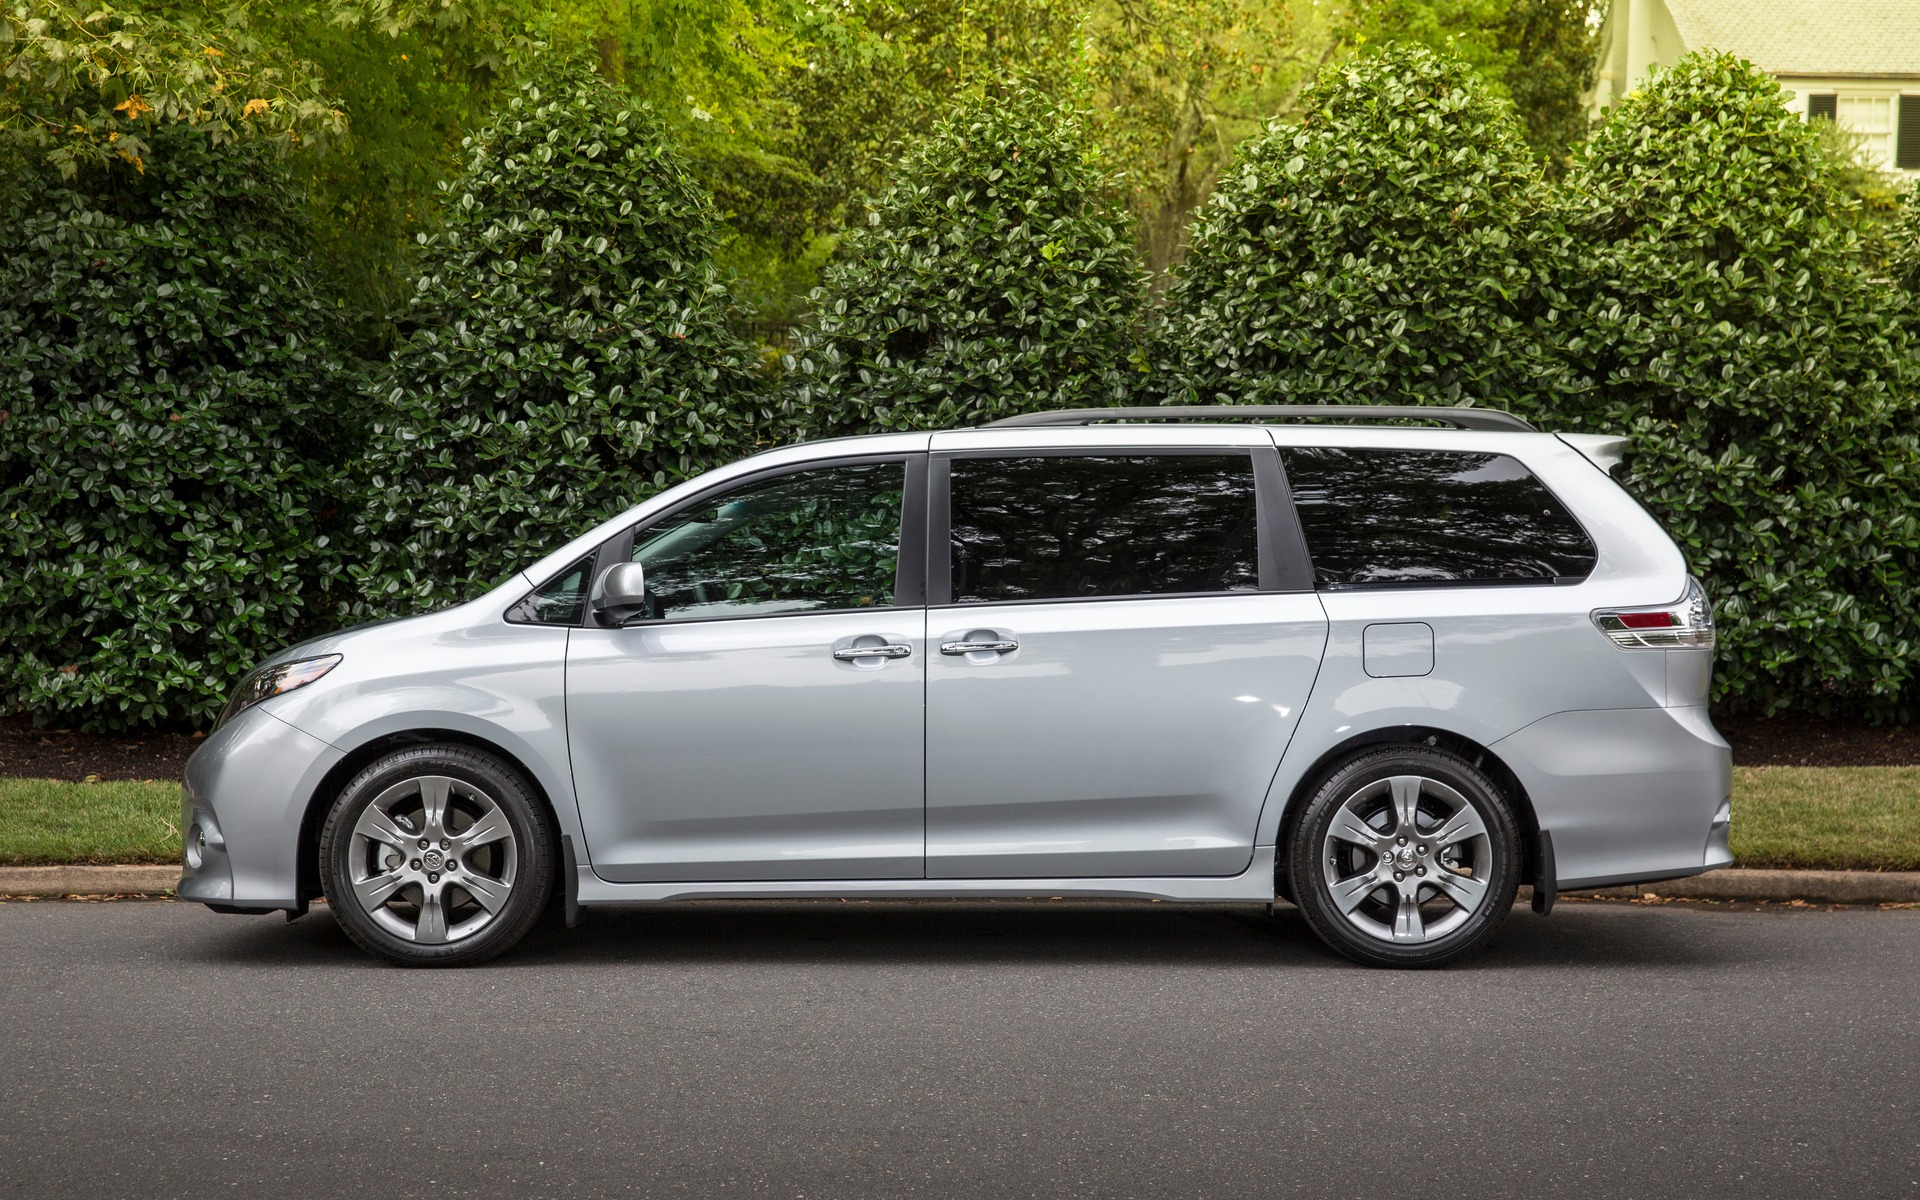 Measuring 5085 mm, the Sienna can accommodate seven or eight passengers.